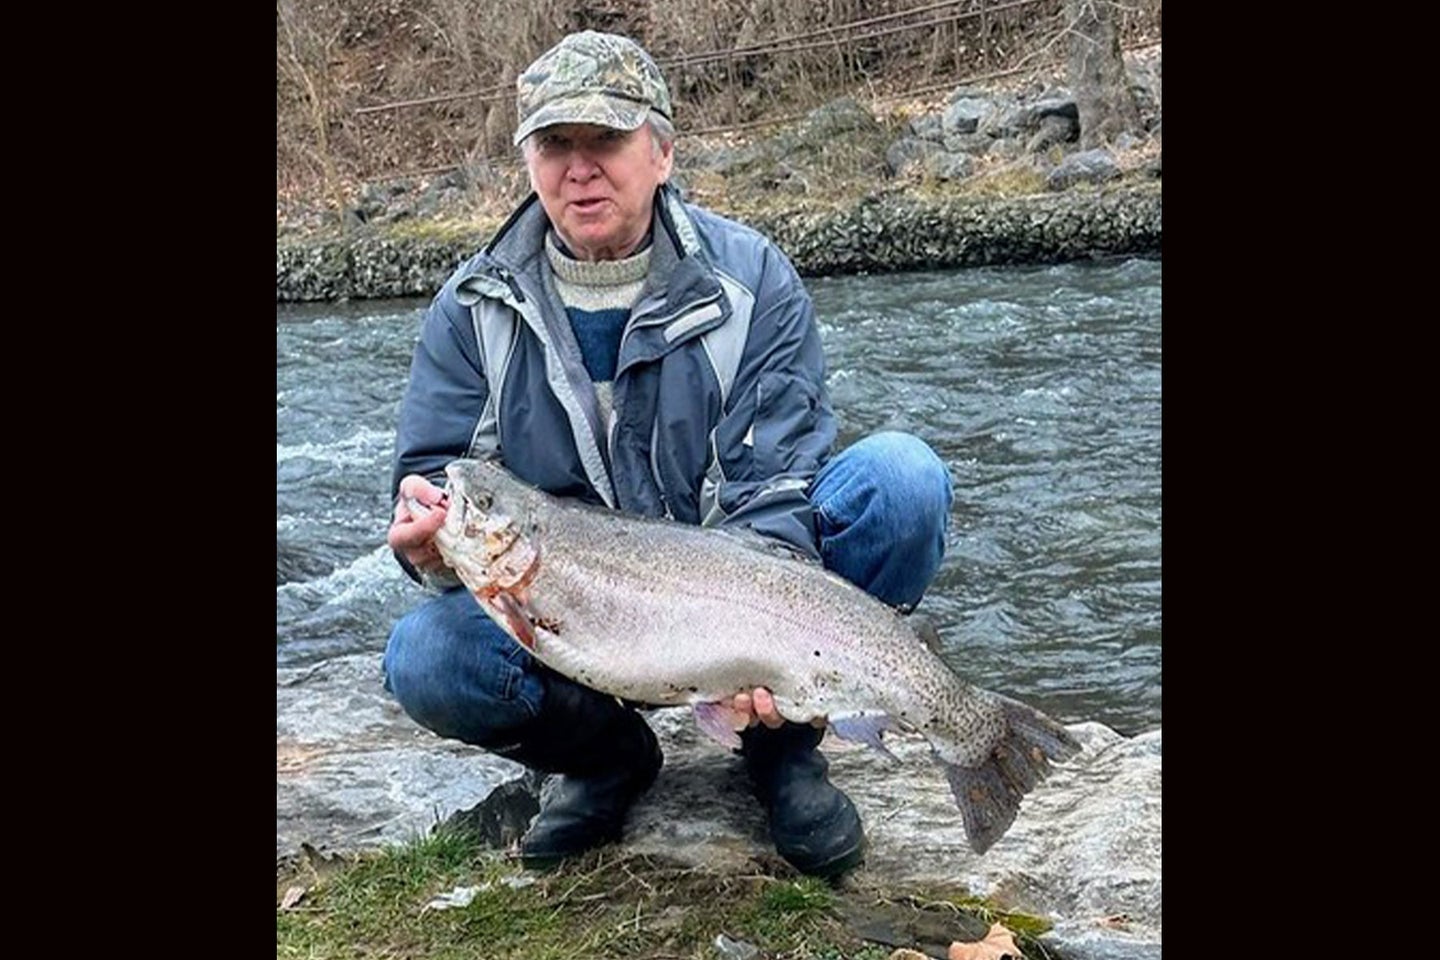 An angler poses with a state-record trout in Maryland.